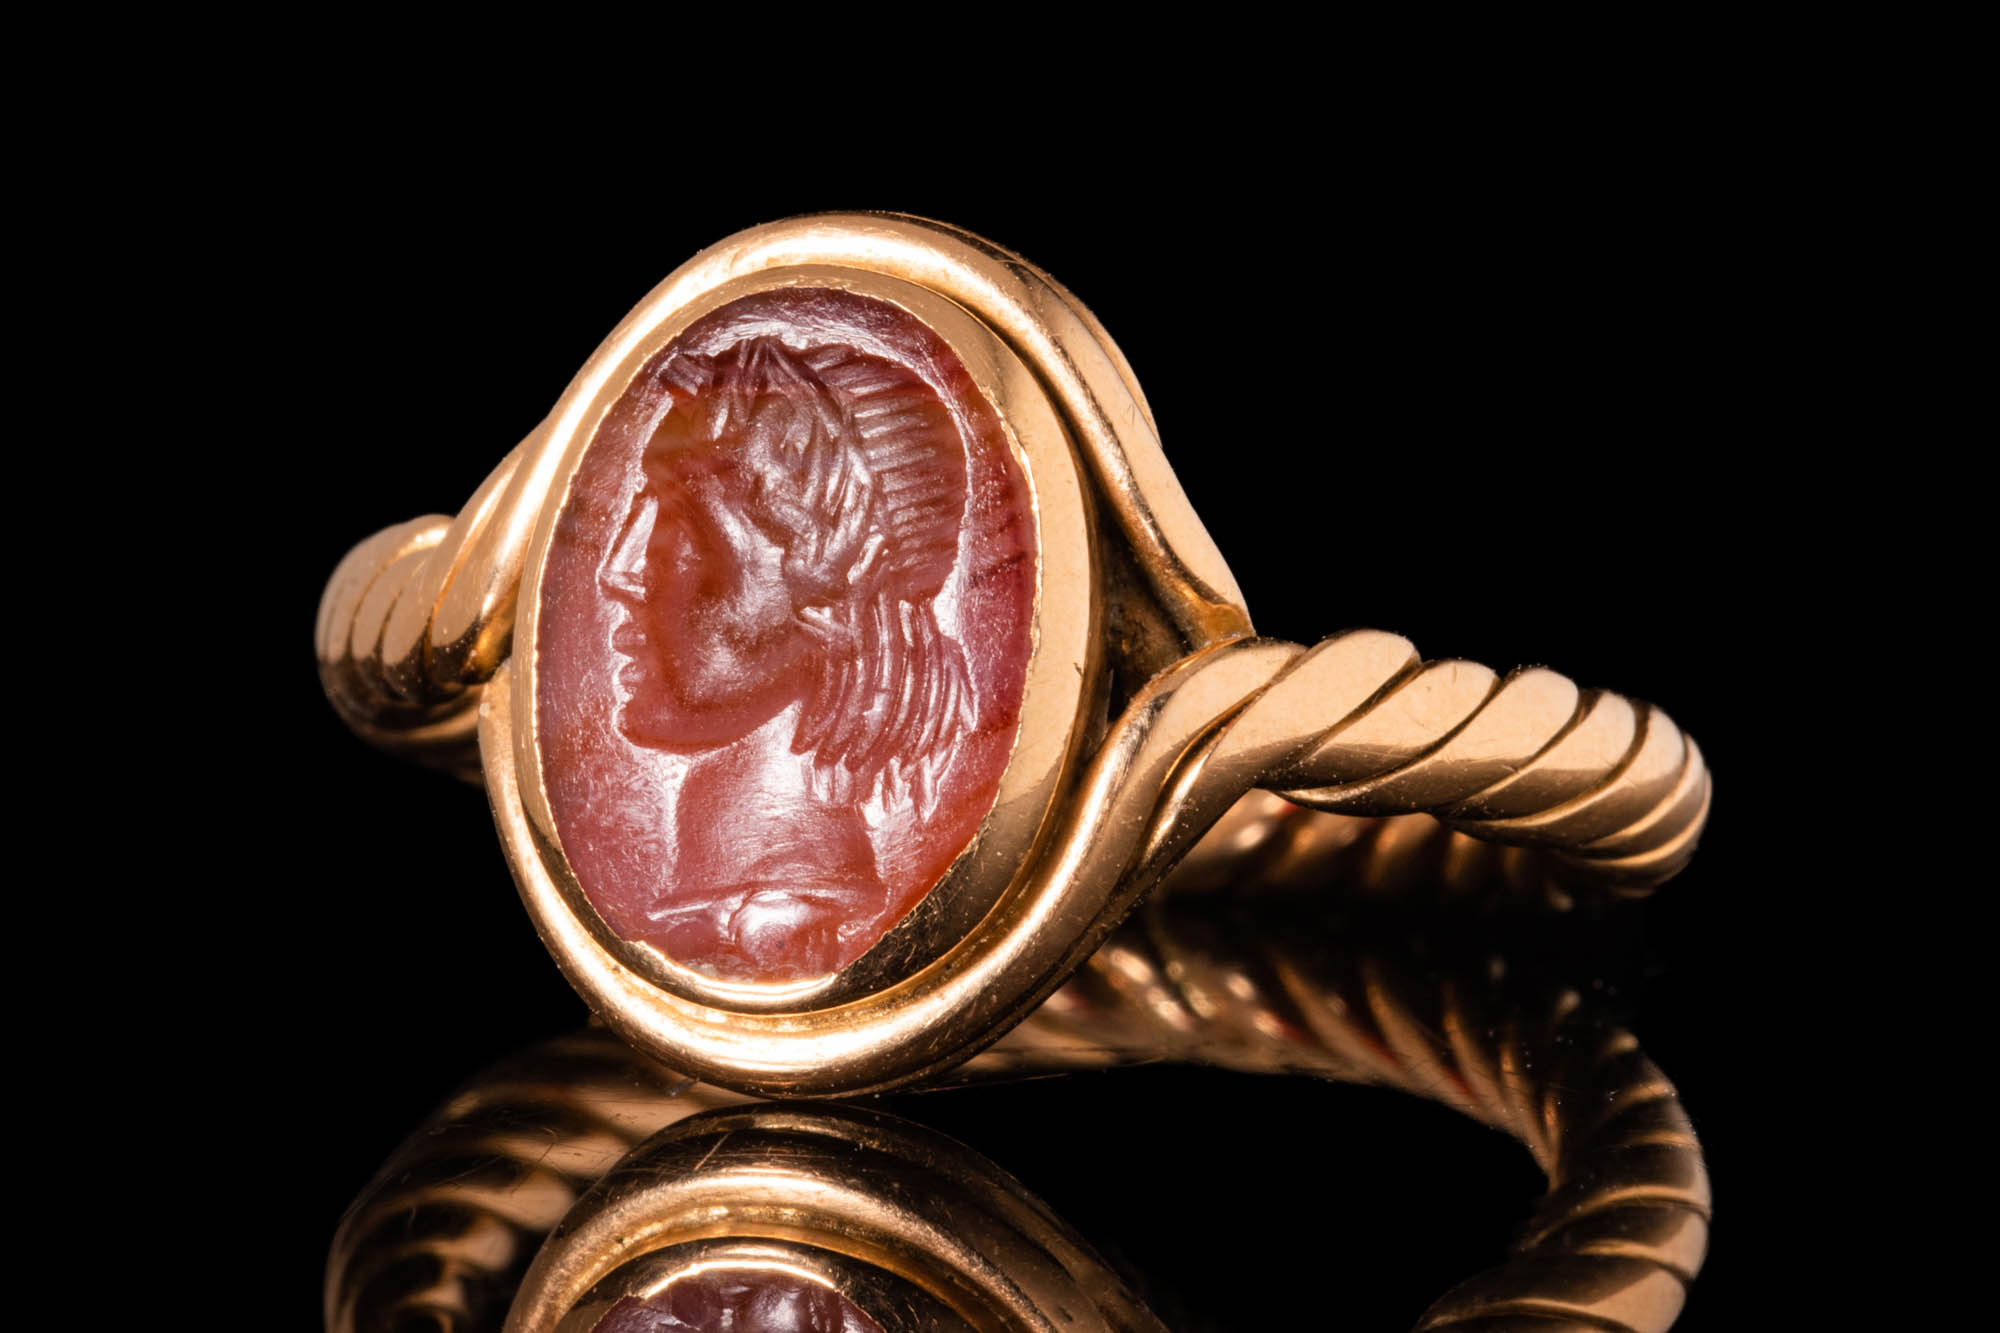 ROMAN CARNELIAN INTAGLIO DEPICTING ALEXANDER THE GREAT IN GOLD RING